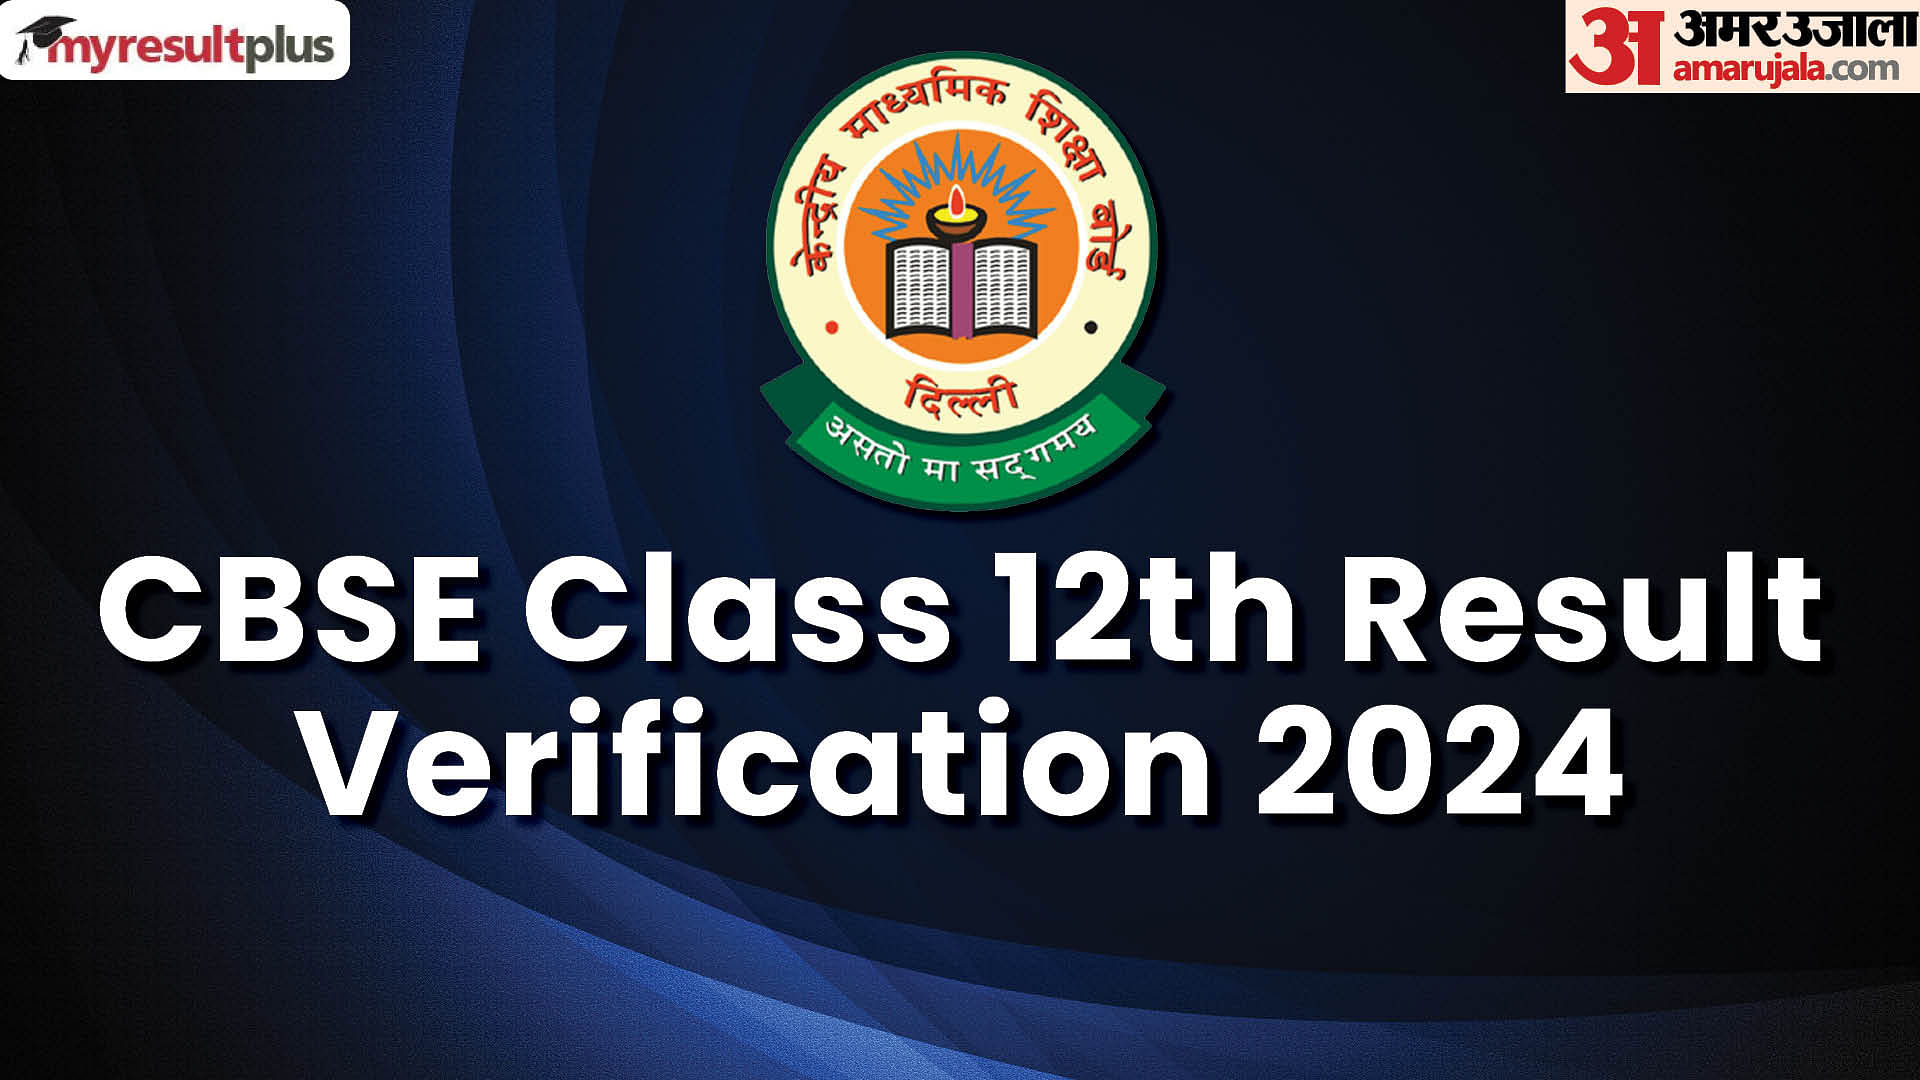 CBSE Class 12 Result Verification 2024 application window open now, Read the steps to submit application here